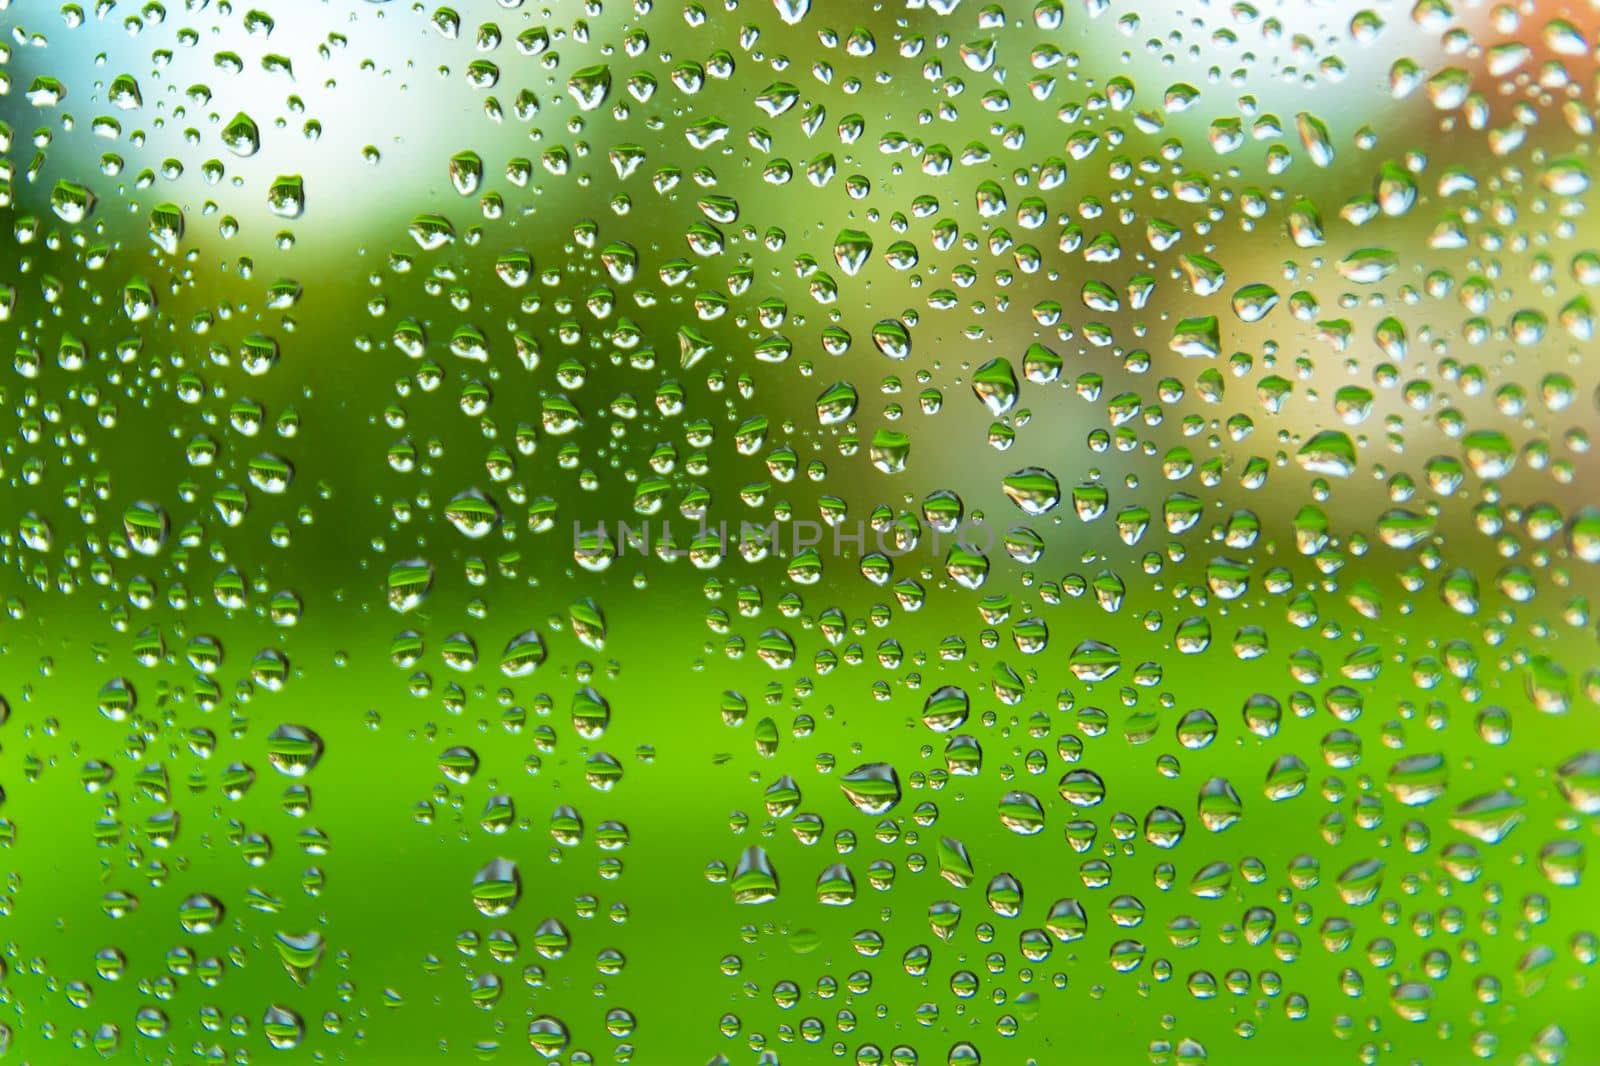 Raindrops on the window glass on a green outdoor background by darekb22